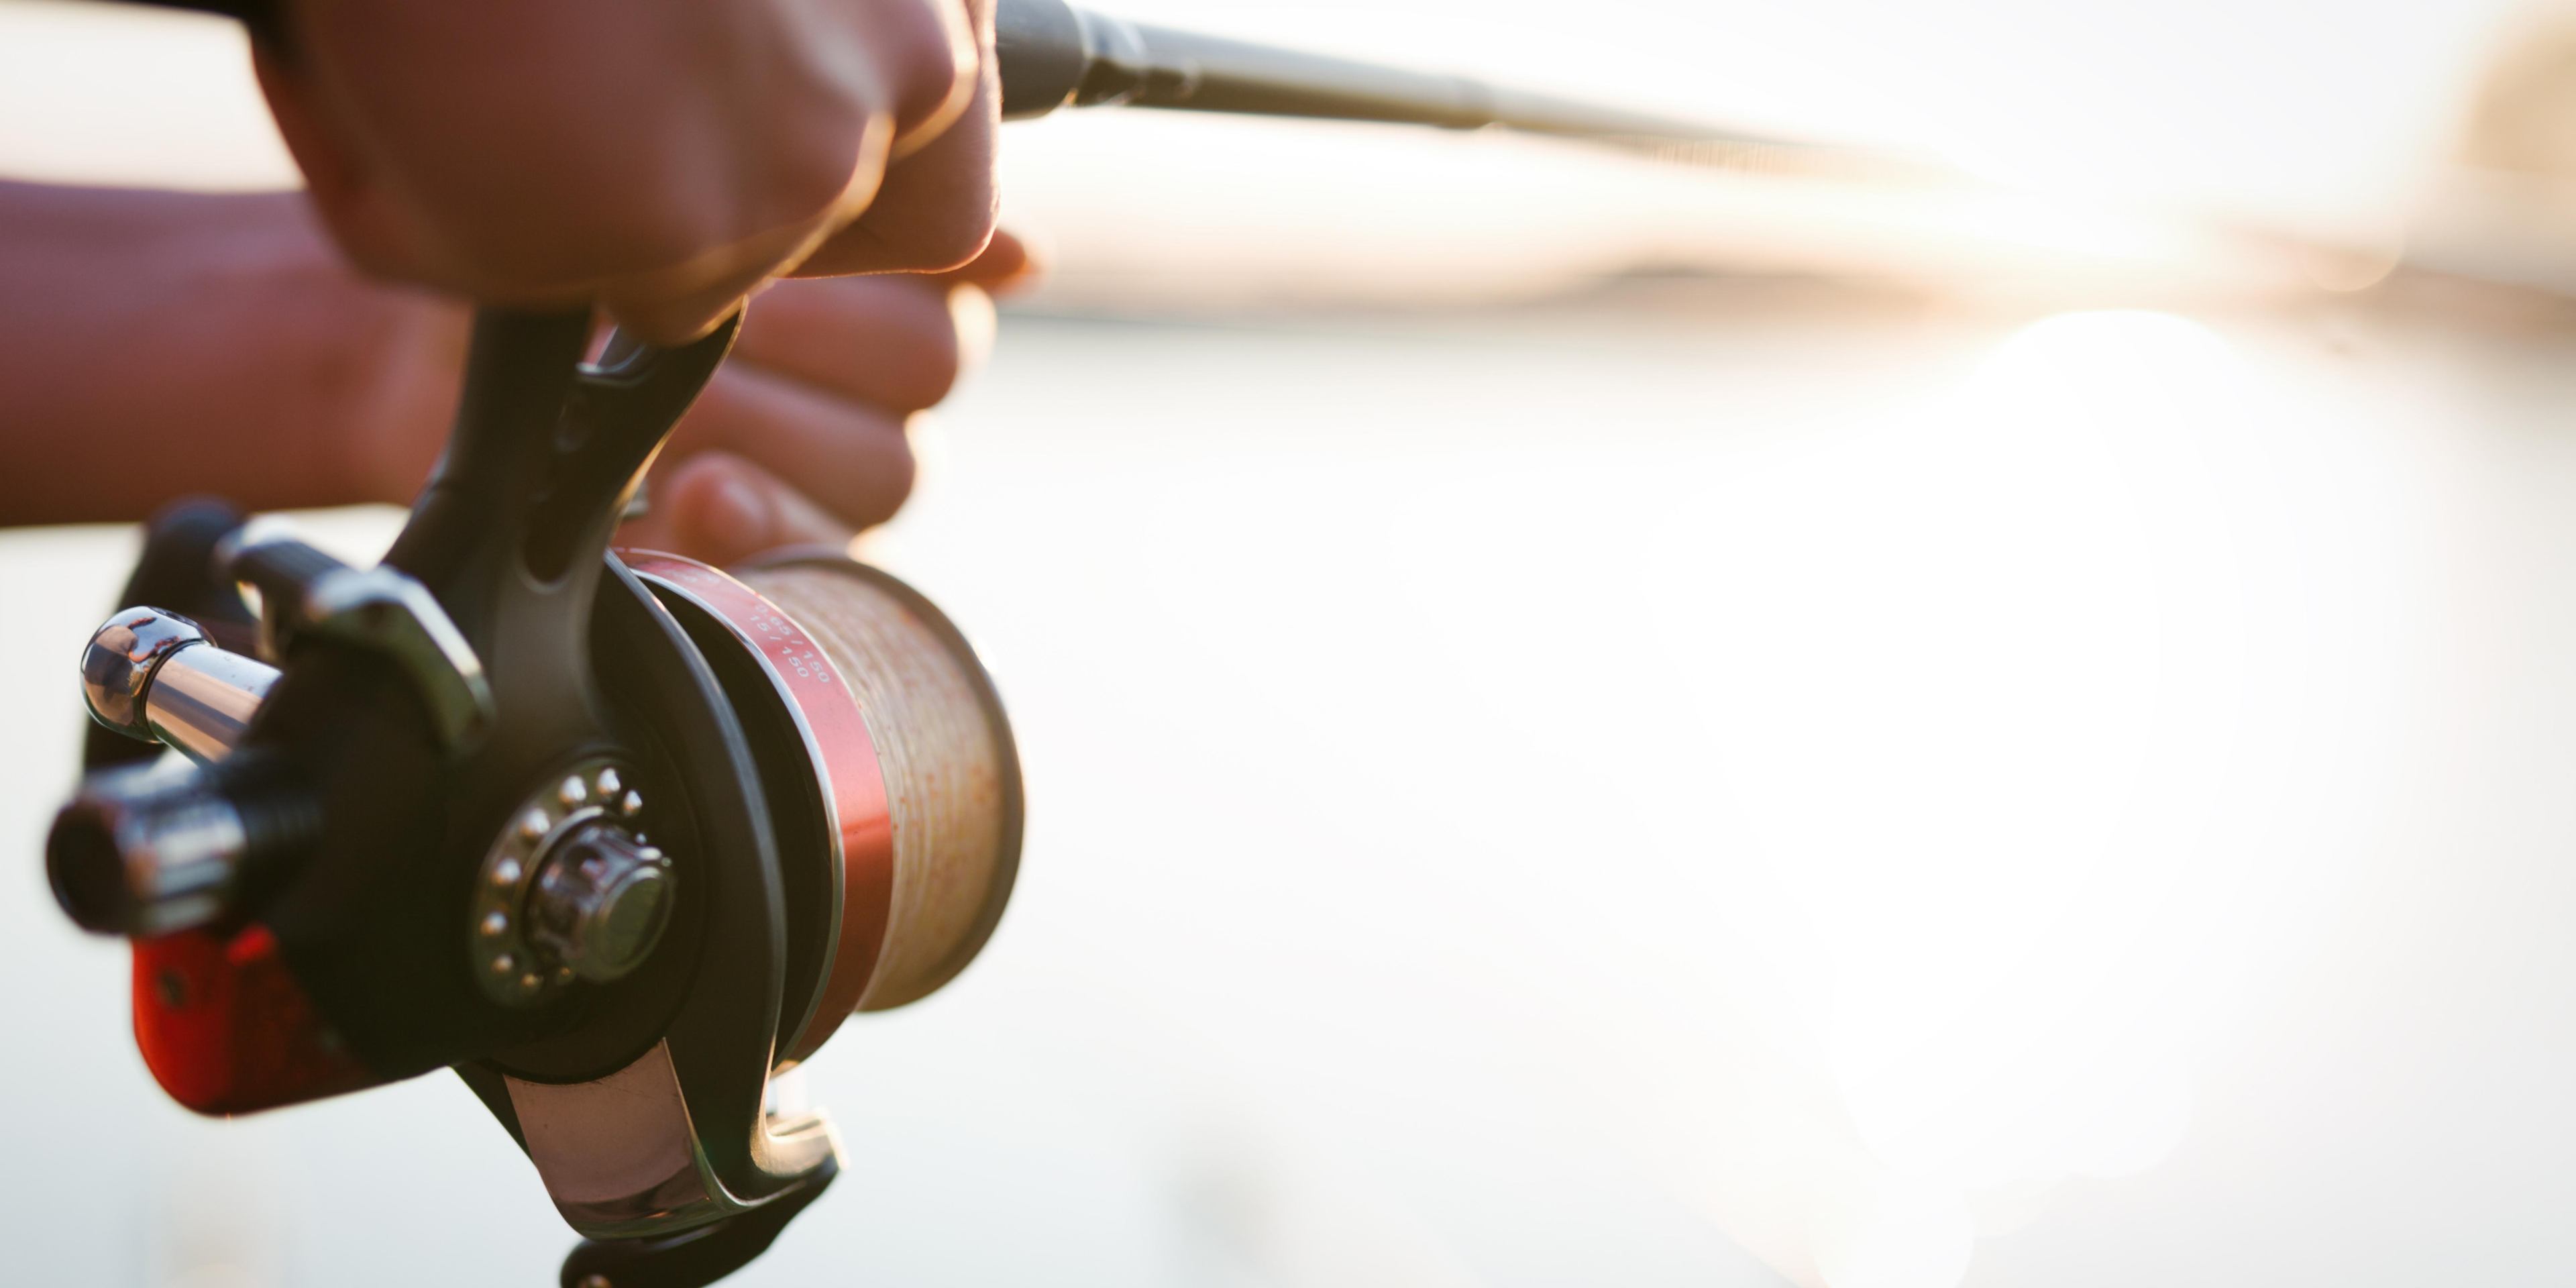 Are Braided Fishing Lines Really The Best?